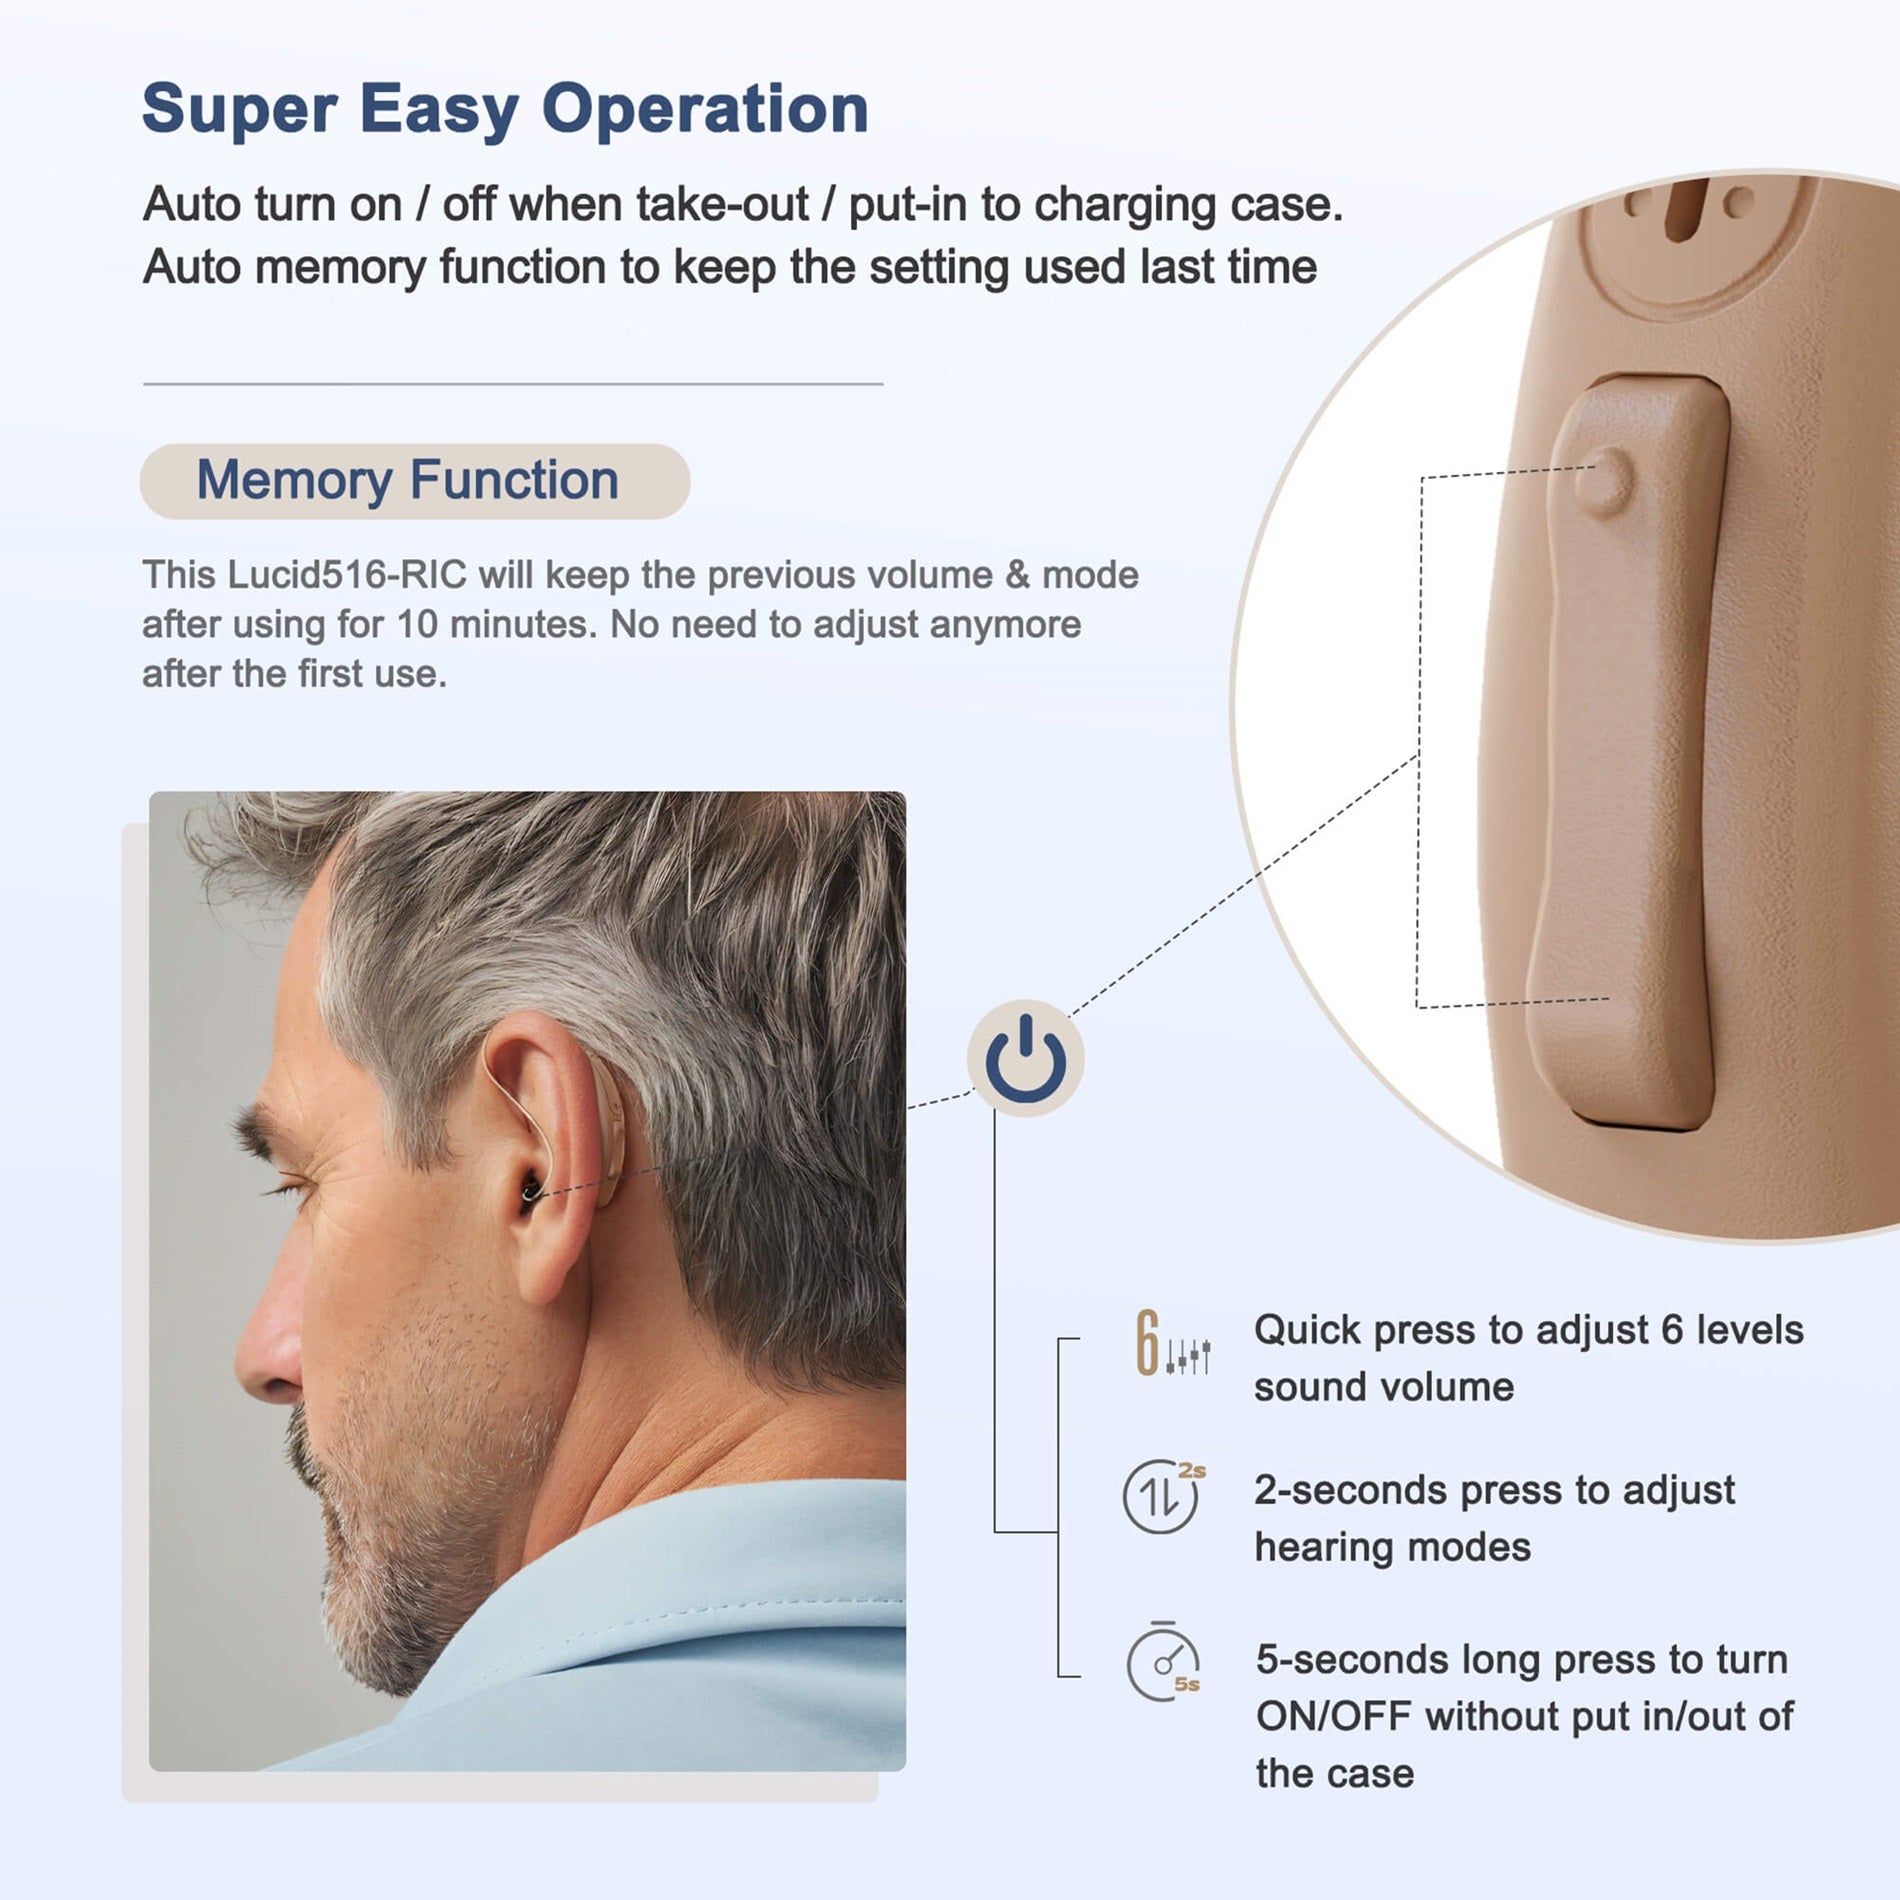 Hearing Aids Near Me - Find Lucid516 RIC-b1: Best OTC Hearing Aid, Inexpensive Solution, Consumer Reports Best Over the Counter Hearing Aids